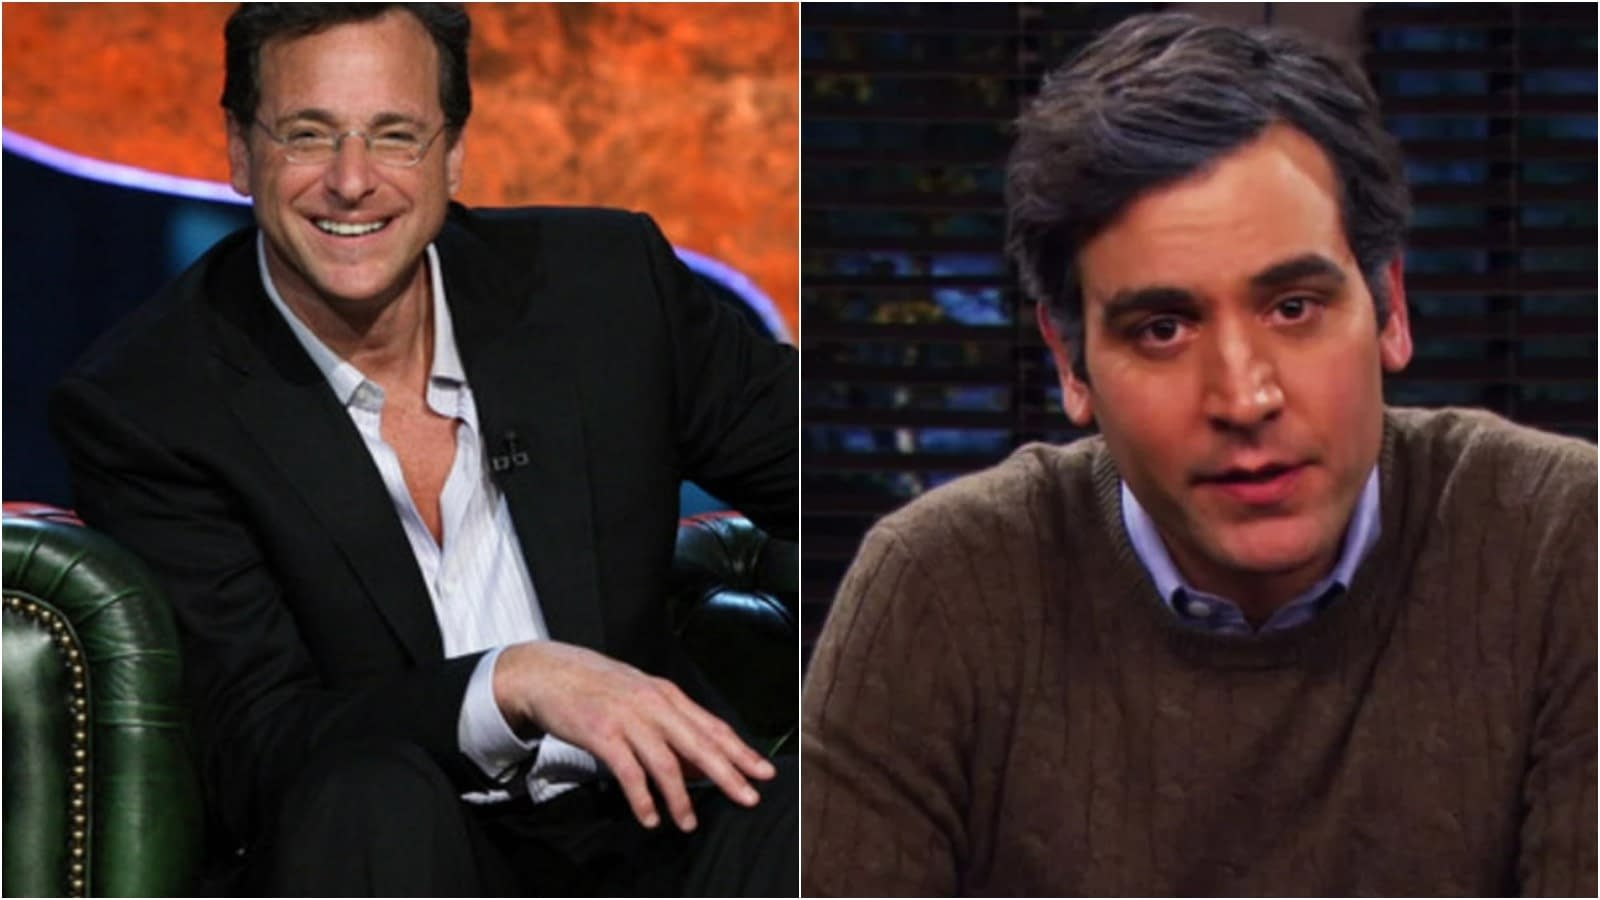 Himym Co-Creators On Why Bob Saget Was Perfect For Future Ted & More